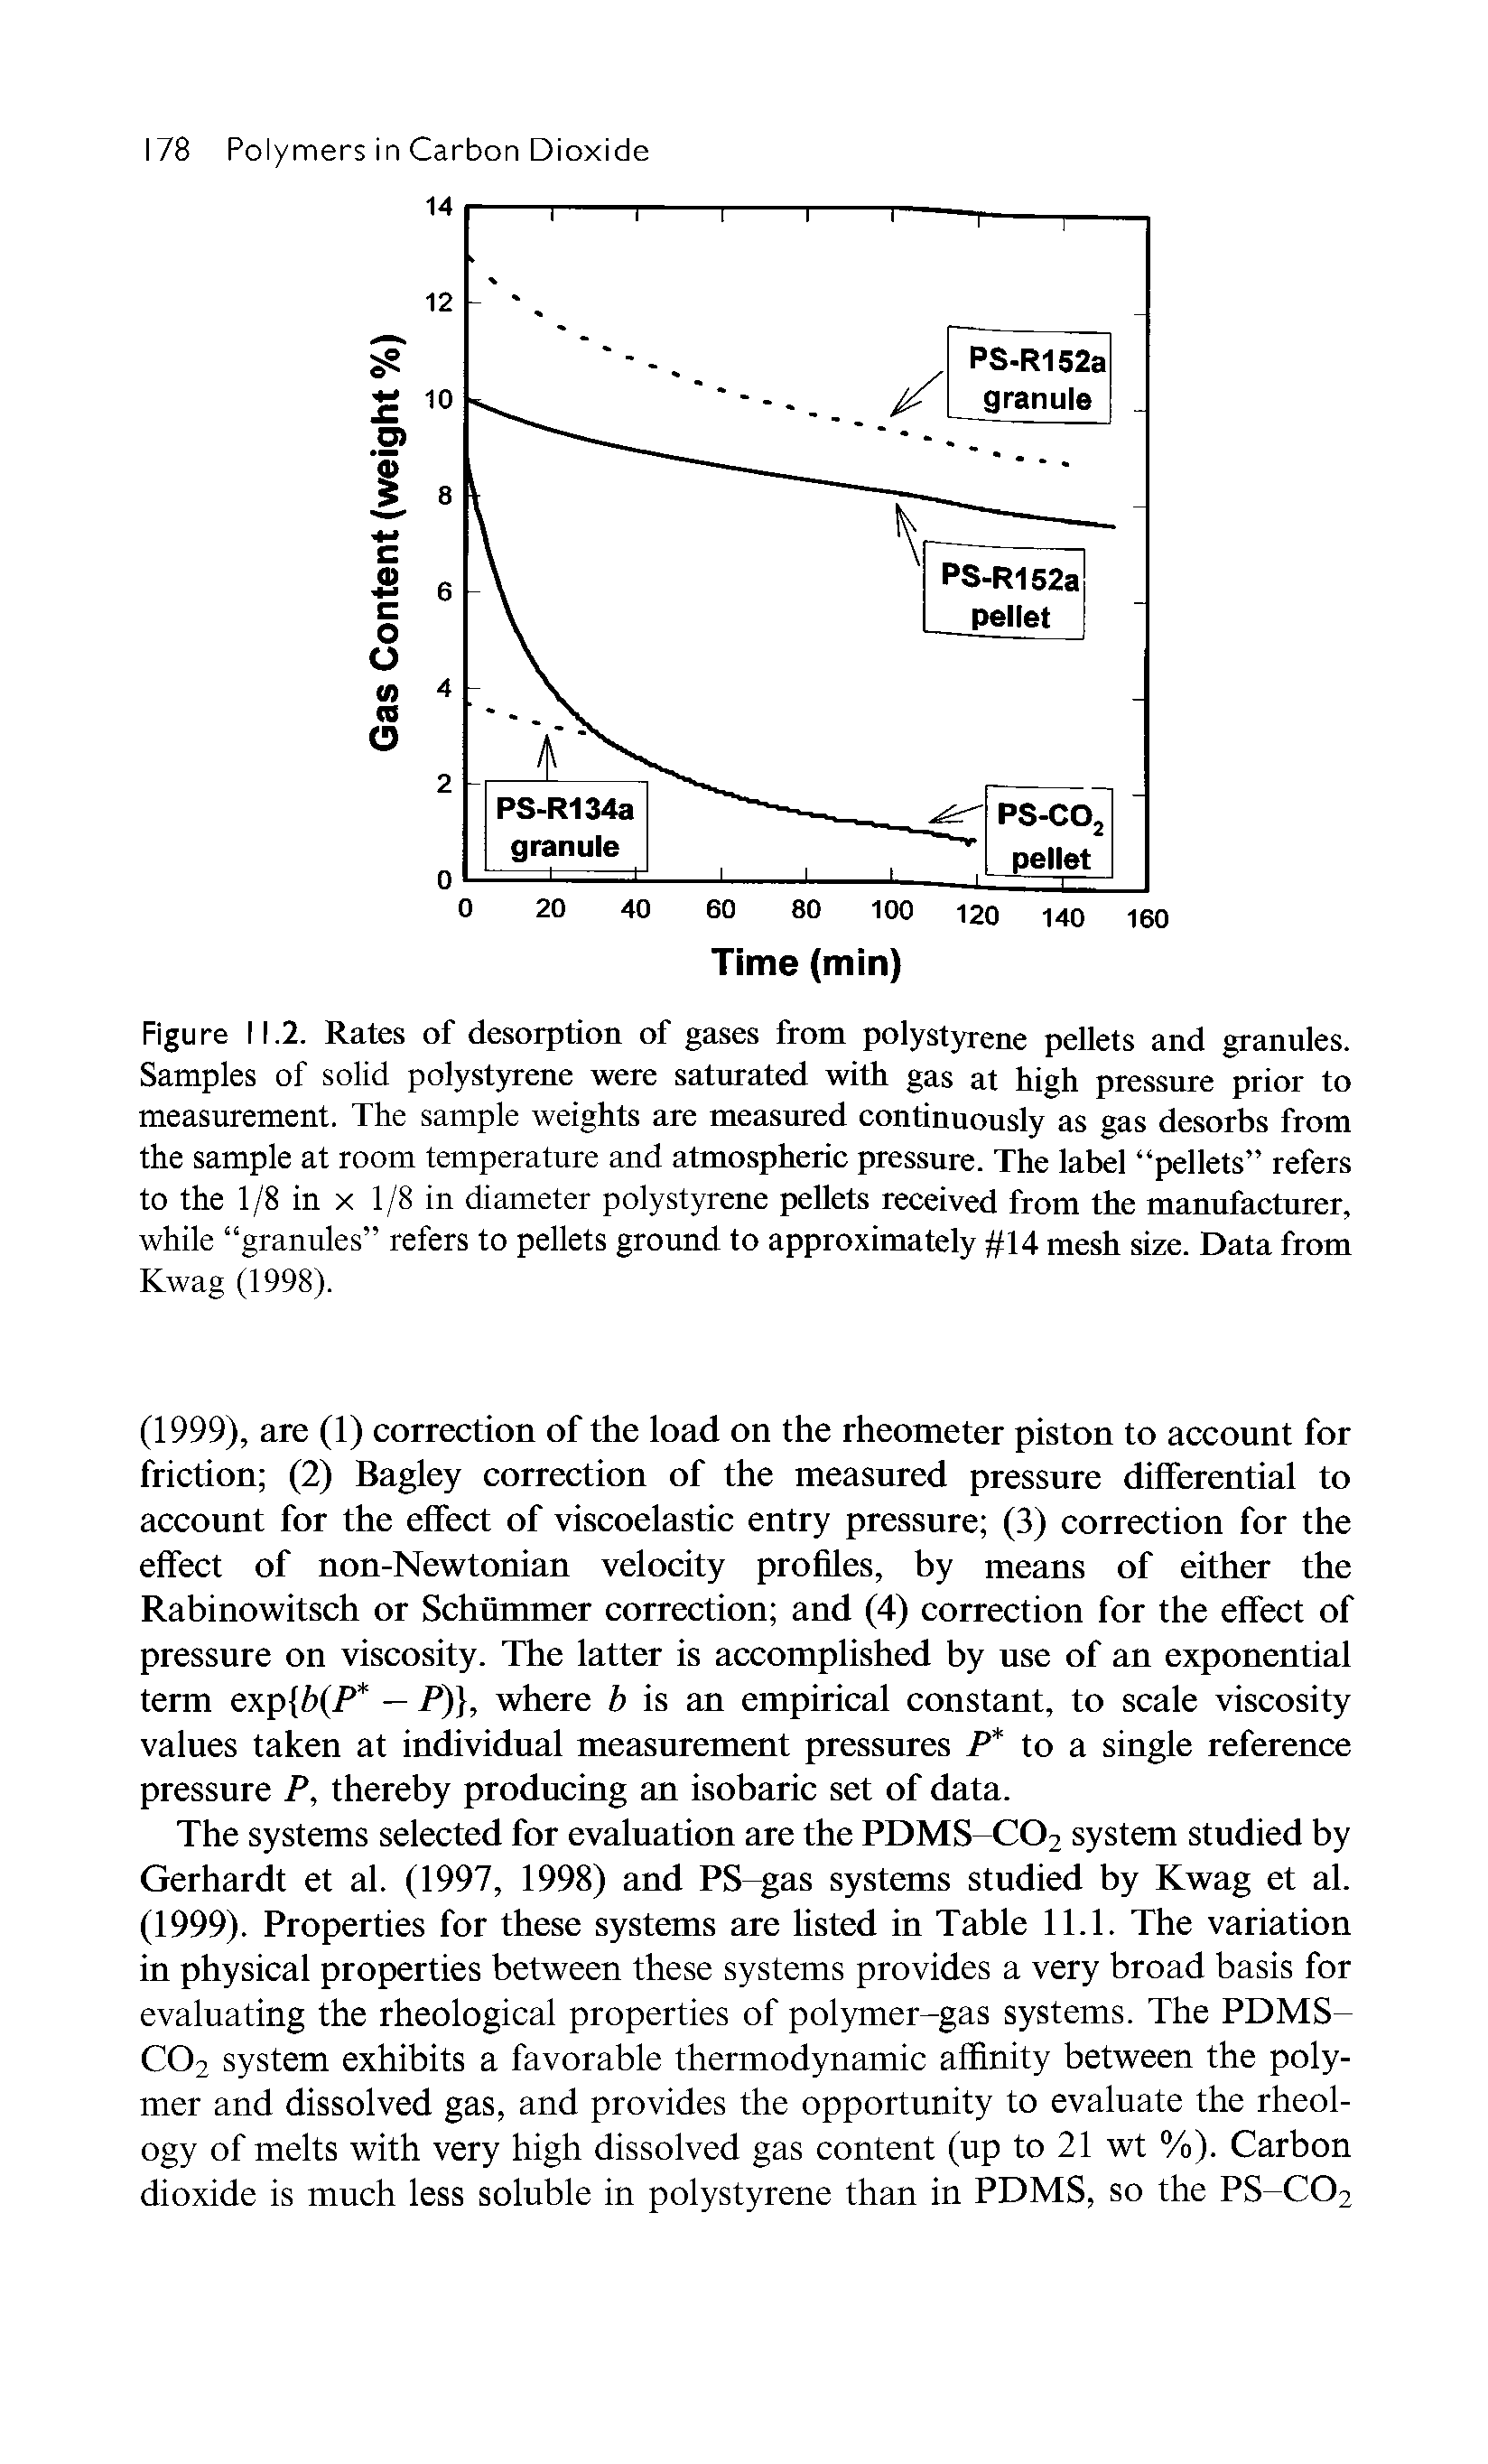 Figure 11.2. Rates of desorption of gases from polystyrene pellets and granules. Samples of solid polystyrene were saturated with gas at high pressure prior to measurement. The sample weights are measured continuously as gas desorbs from the sample at room temperature and atmospheric pressure. The label pellets refers to the 1/8 in x 1/8 in diameter polystyrene pellets received from the manufacturer, while granules refers to pellets ground to approximately 14 mesh size. Data from Kwag (1998).